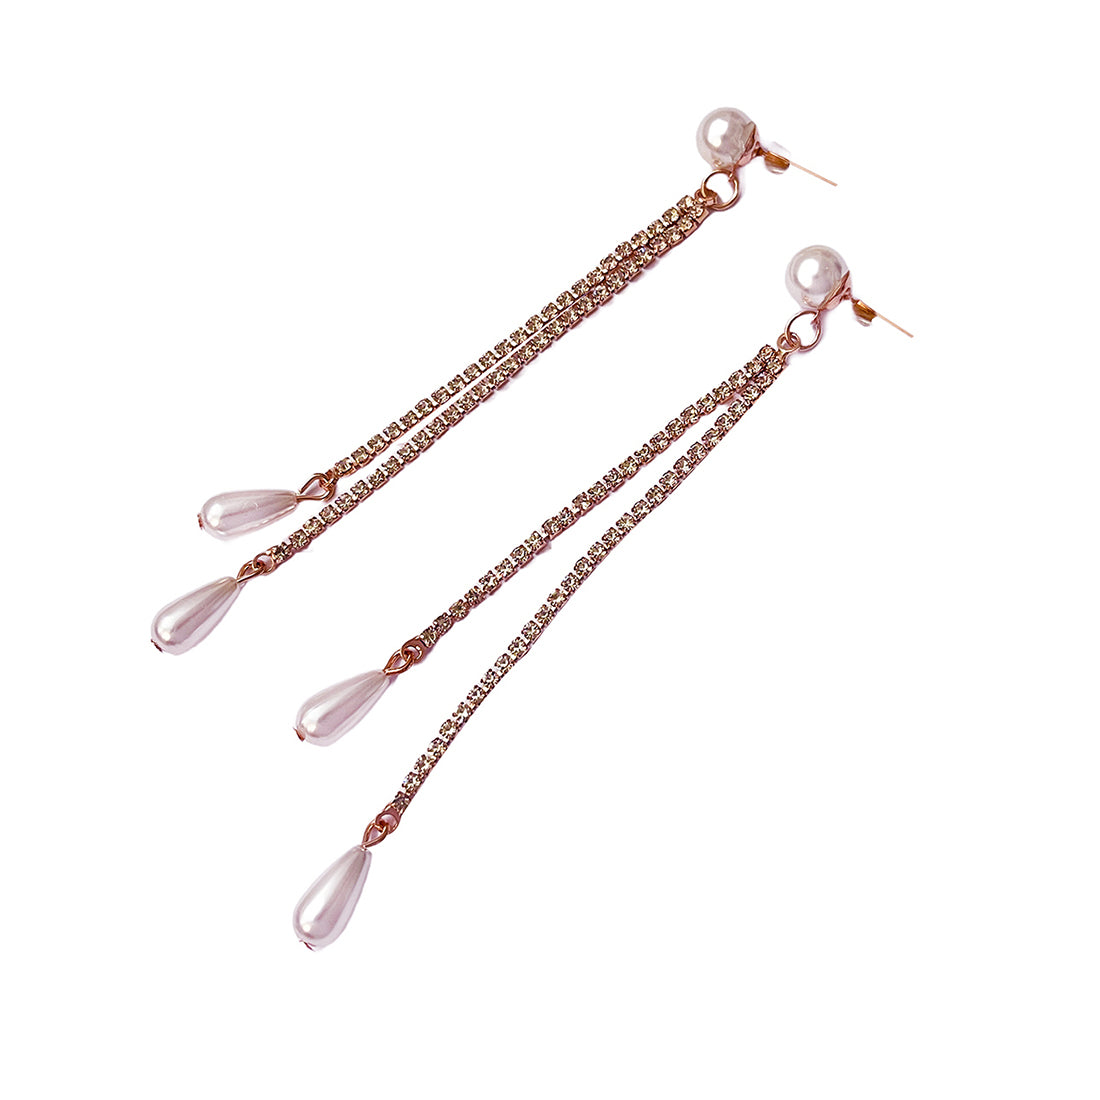 Contemporary Rose Gold-Toned Diamante Crystal & Pearl Studded Long Drop Earrings